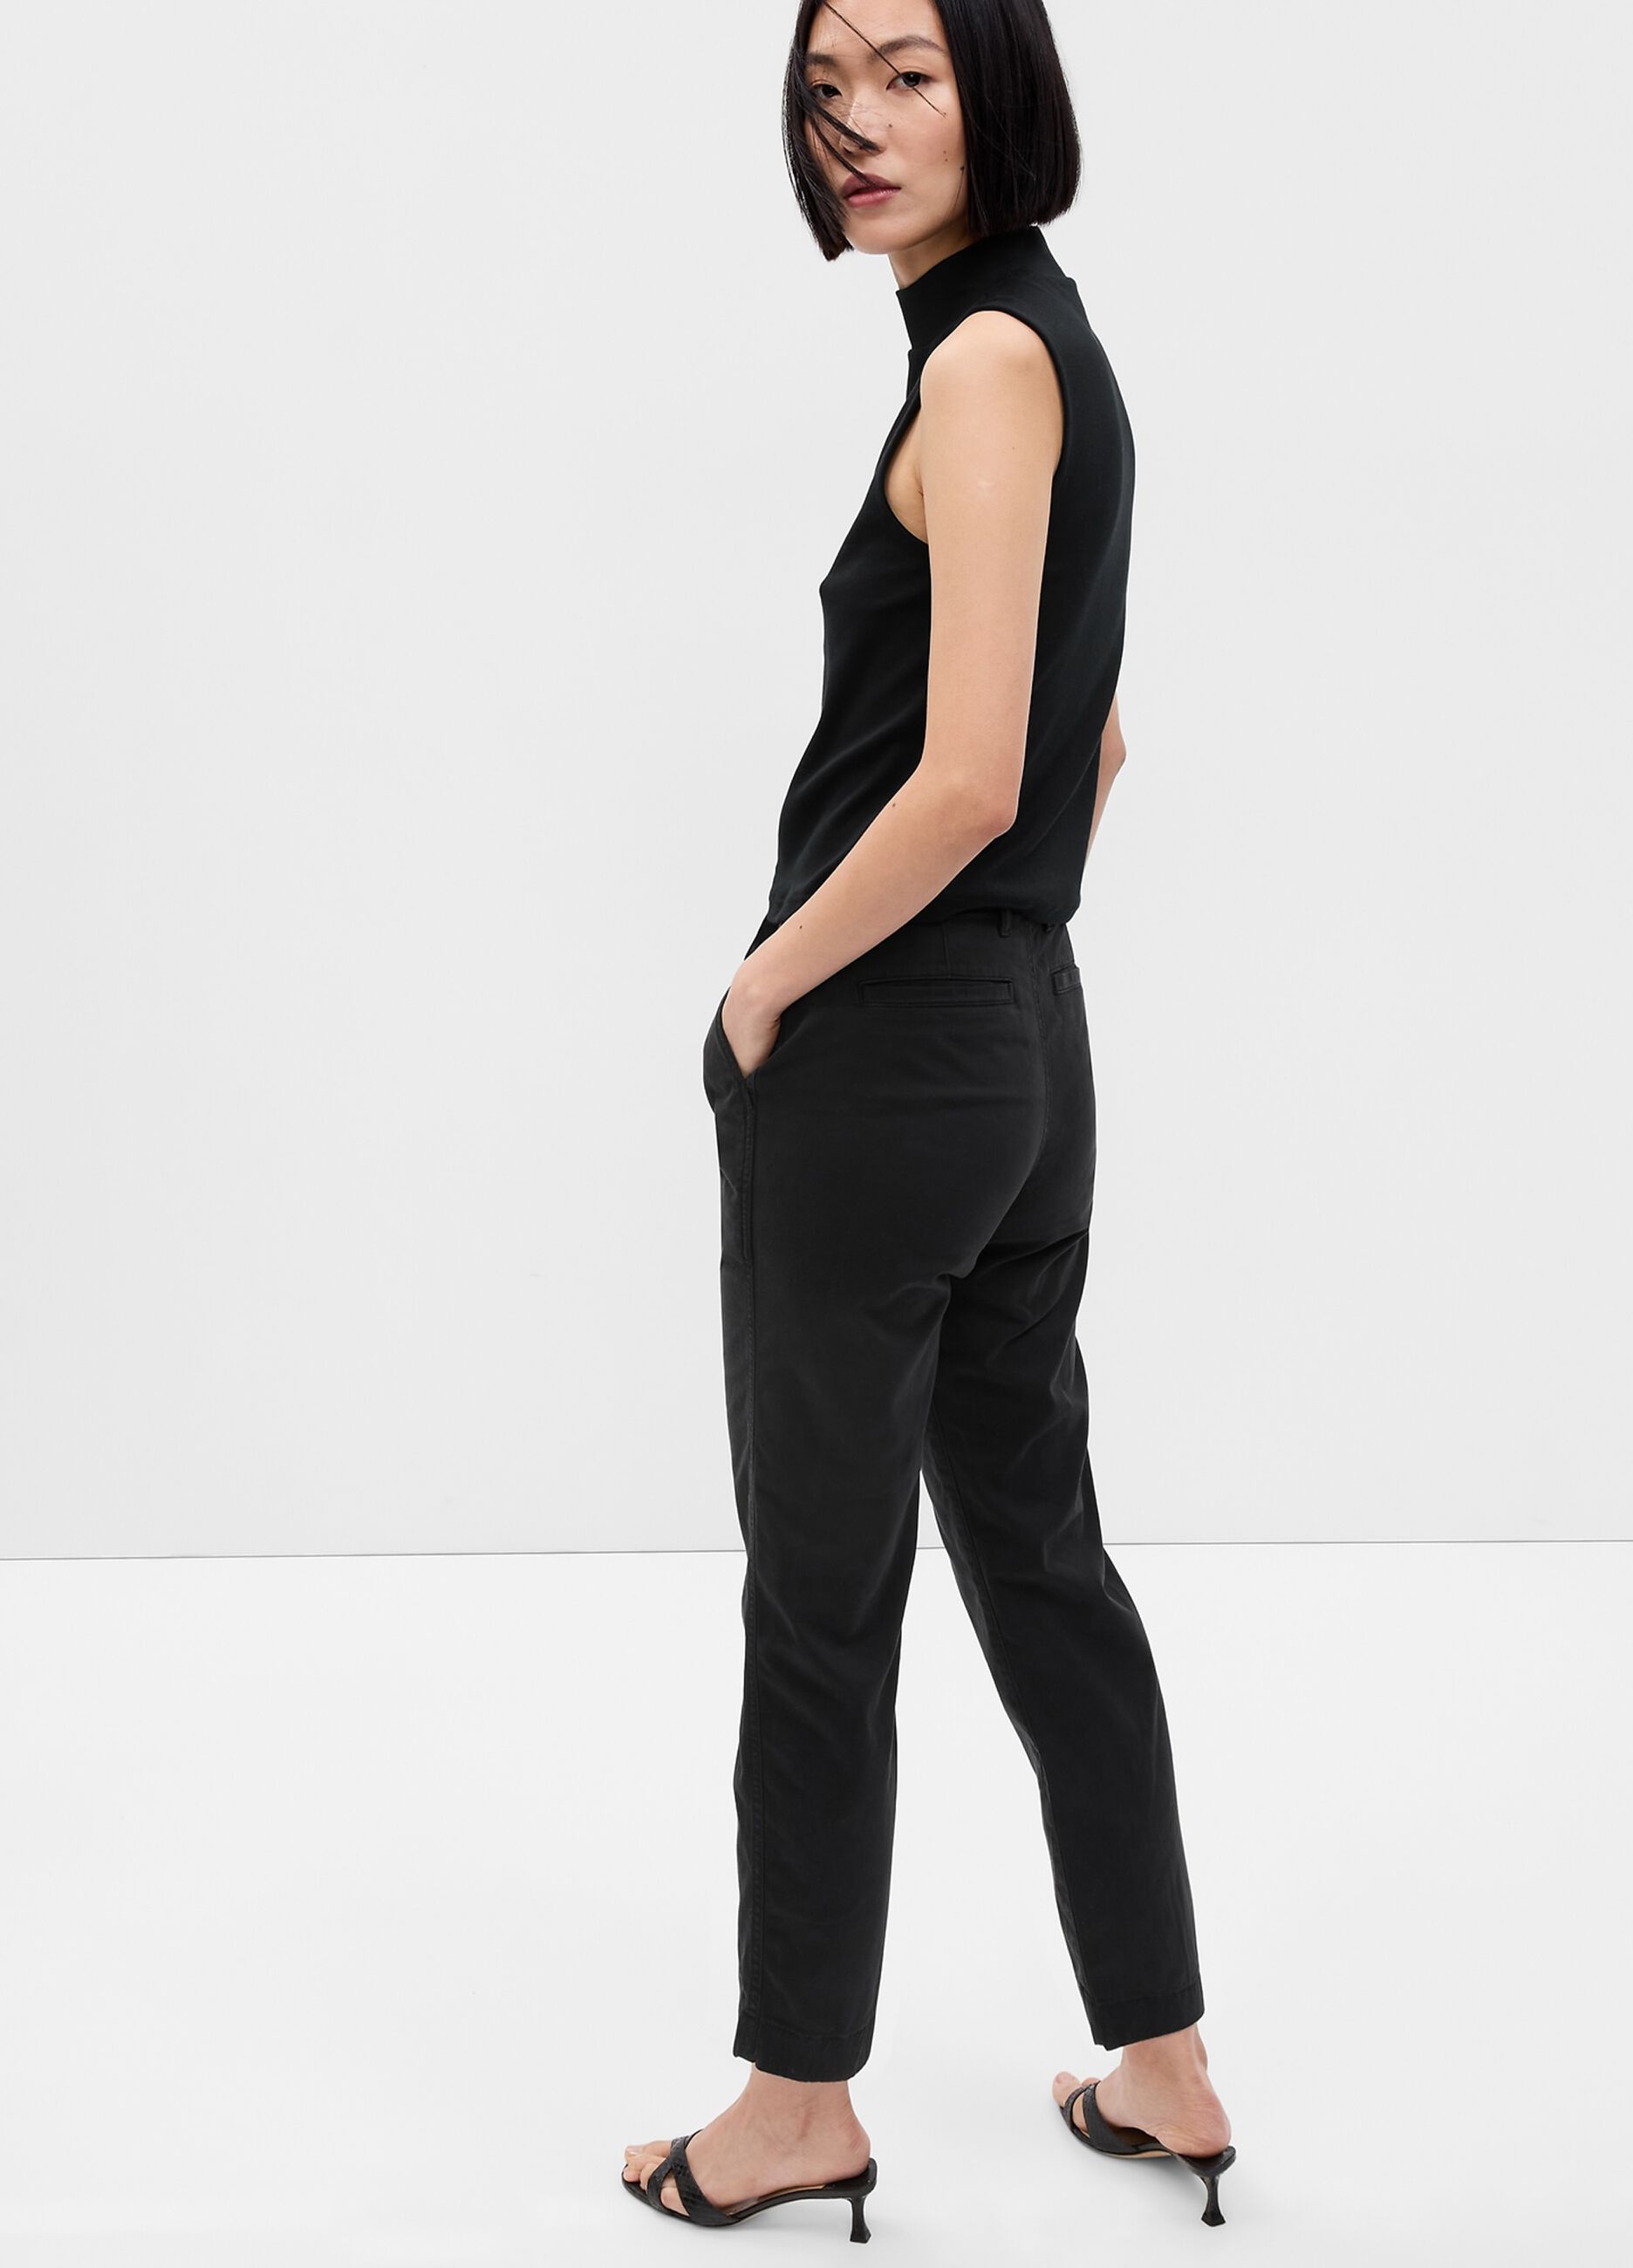 Slim-fit mid-rise chino trousers